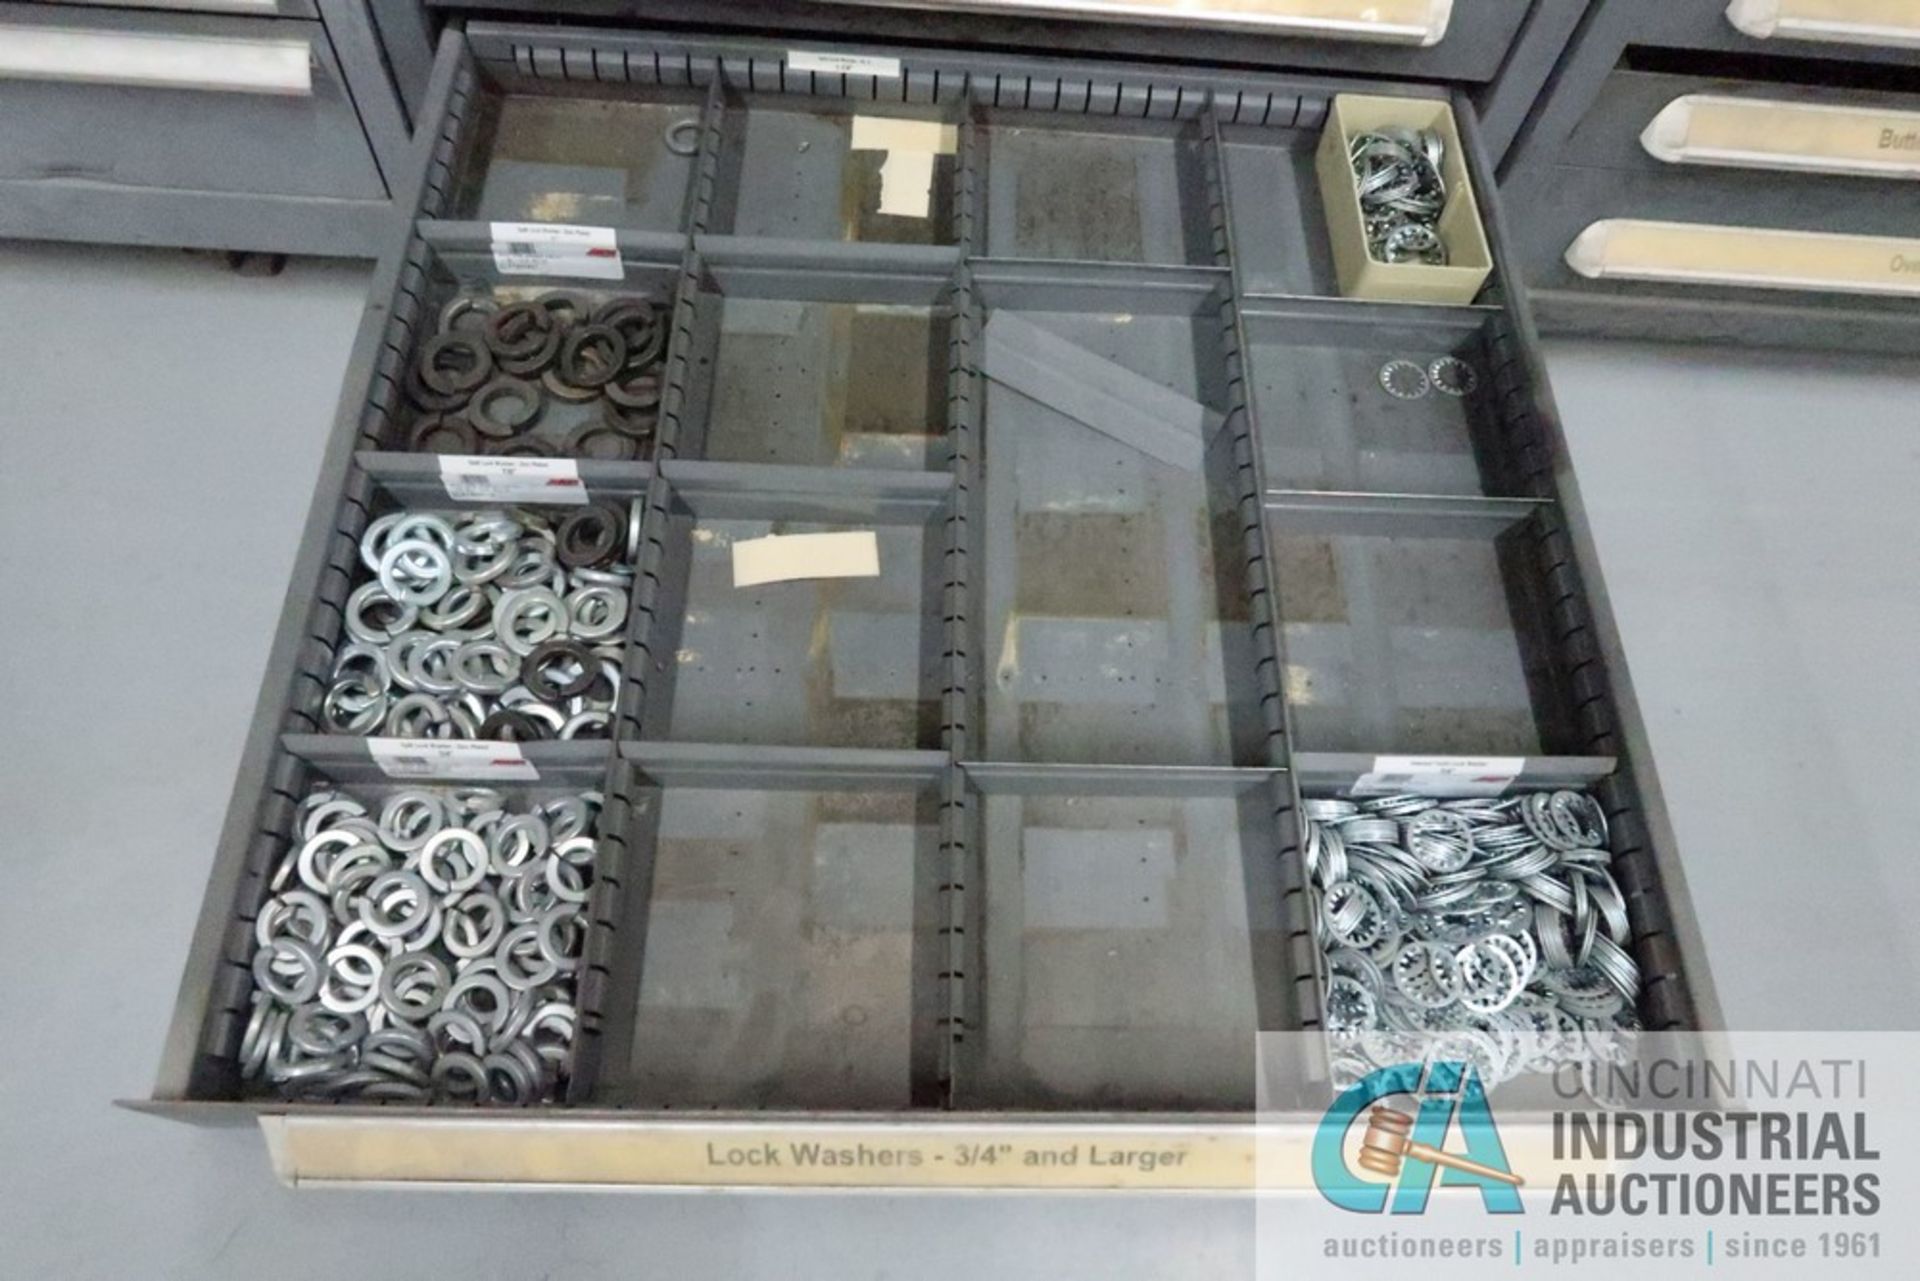 (LOT) 13-DRAWER VIDMAR CABINET WITH CONTENTS INCLUDING WING NUTS, HEX NUTS, LOCK WASHERS (CABINET - Image 14 of 14